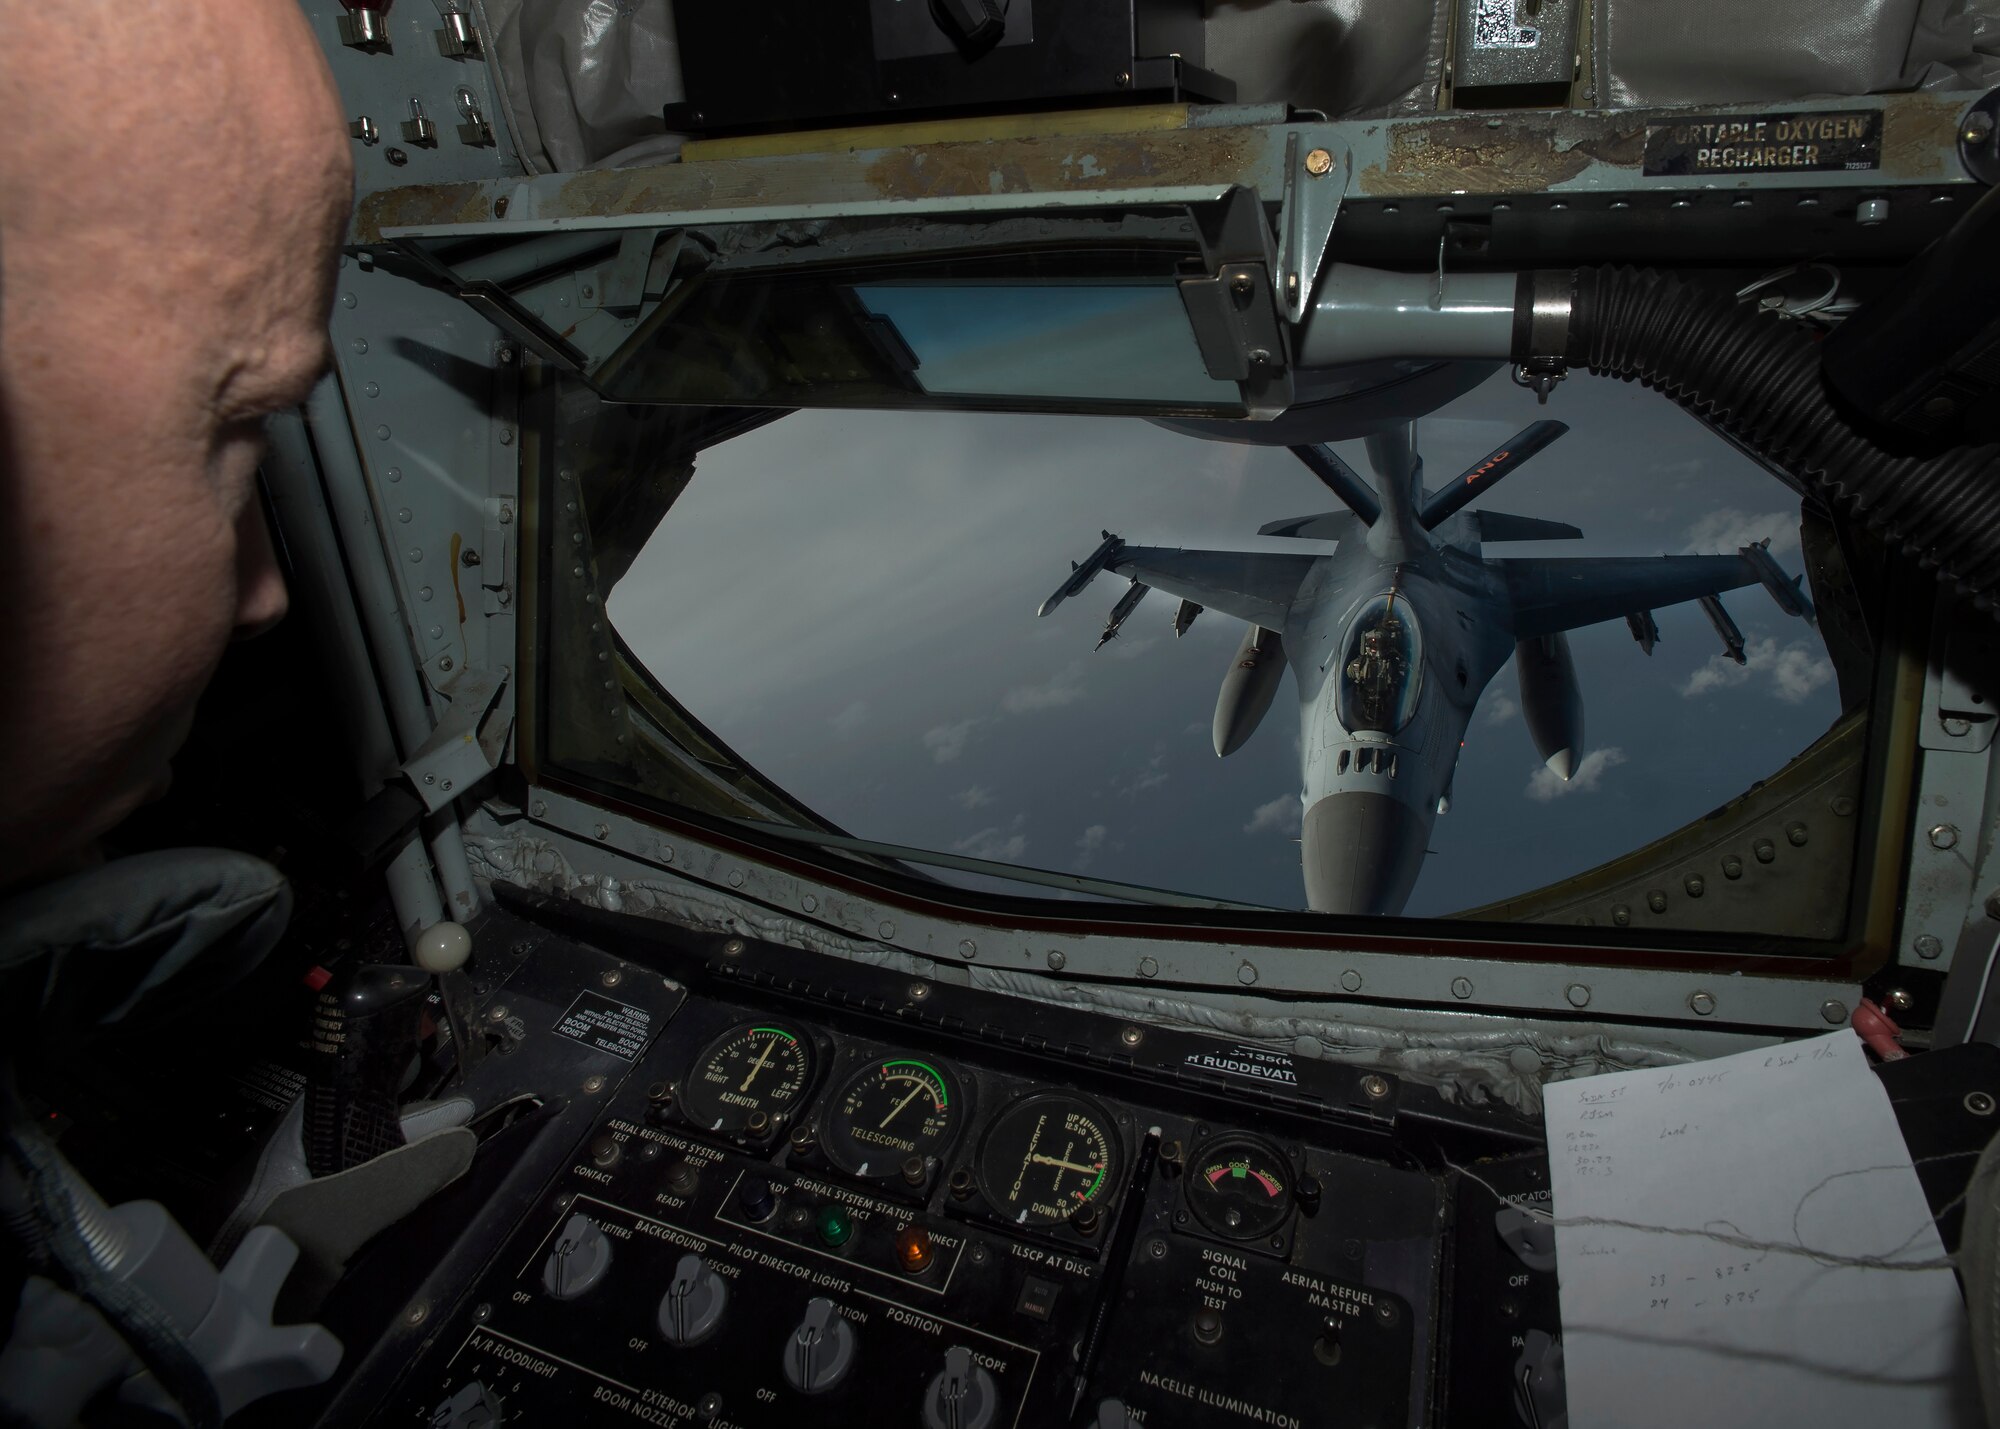 U.S. Air Force Master Sgt. Eric Jones, boom operator assigned to the 134th Air Refueling Wing, Tennessee Air National Guard, refuels 13th and 14th Fighter Squadron F-16 Fighting Falcon’s over Northern Japan, Jan. 18, 2017. Boom operators refuel various types of aircraft in midair, extending the amount of time spent on training or combat missions. (U.S. Air Force photo by Senior Airman Deana Heitzman)